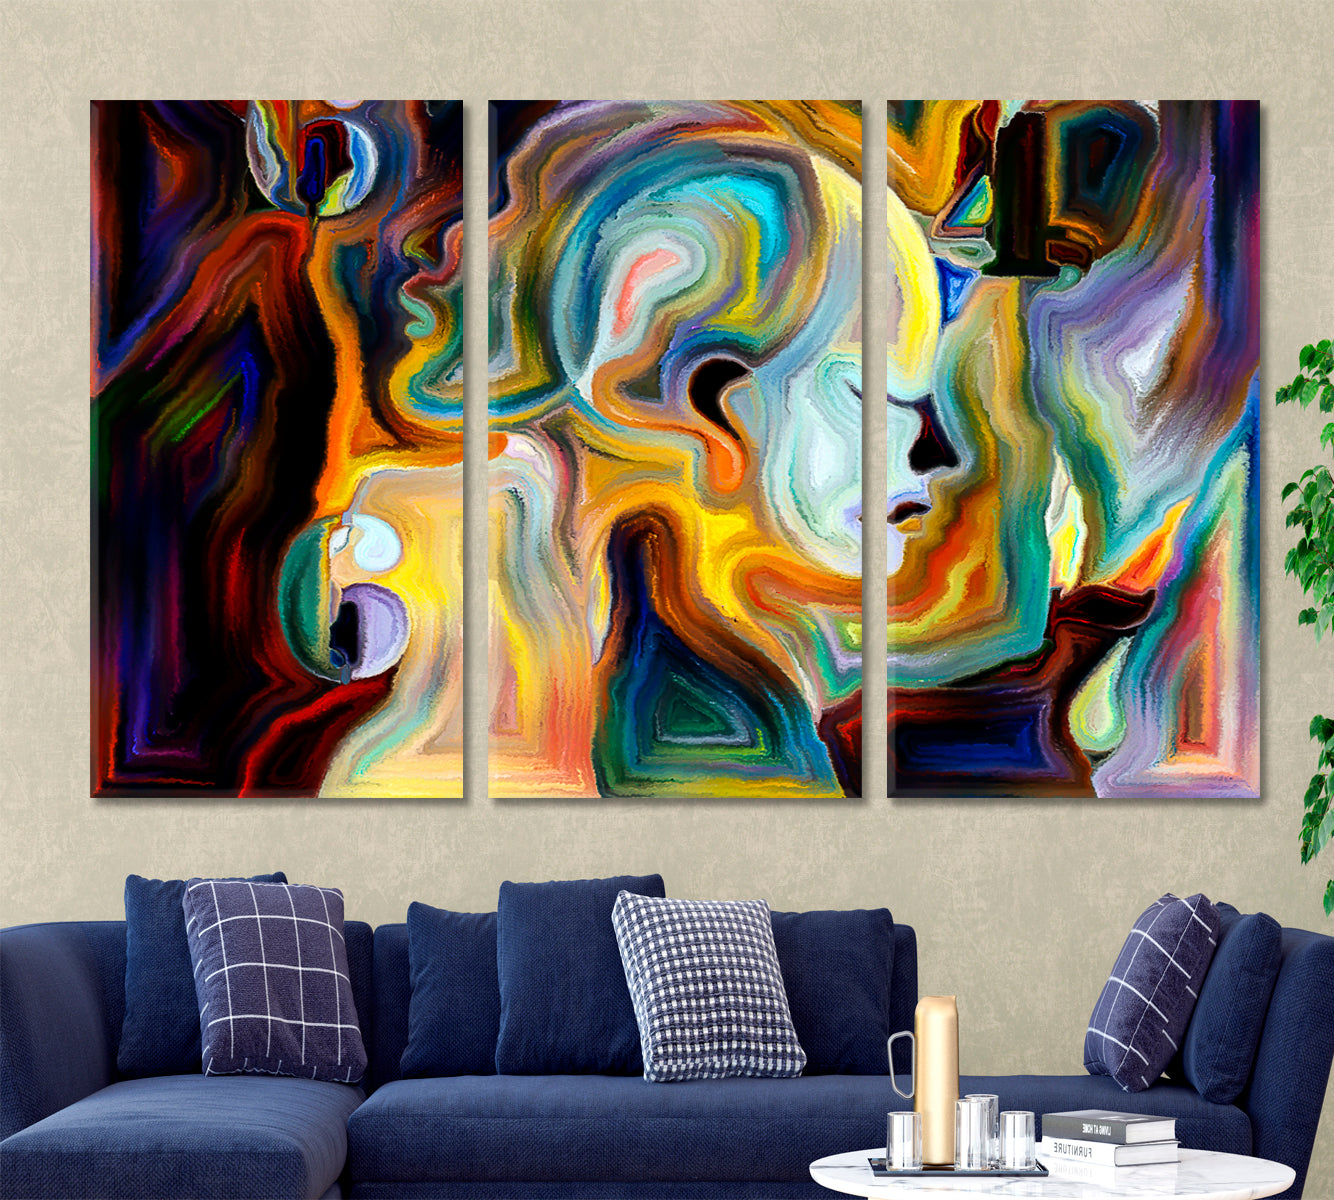 Harmony Forms and Colors of Nature Consciousness Art Artesty 3 panels 36" x 24" 